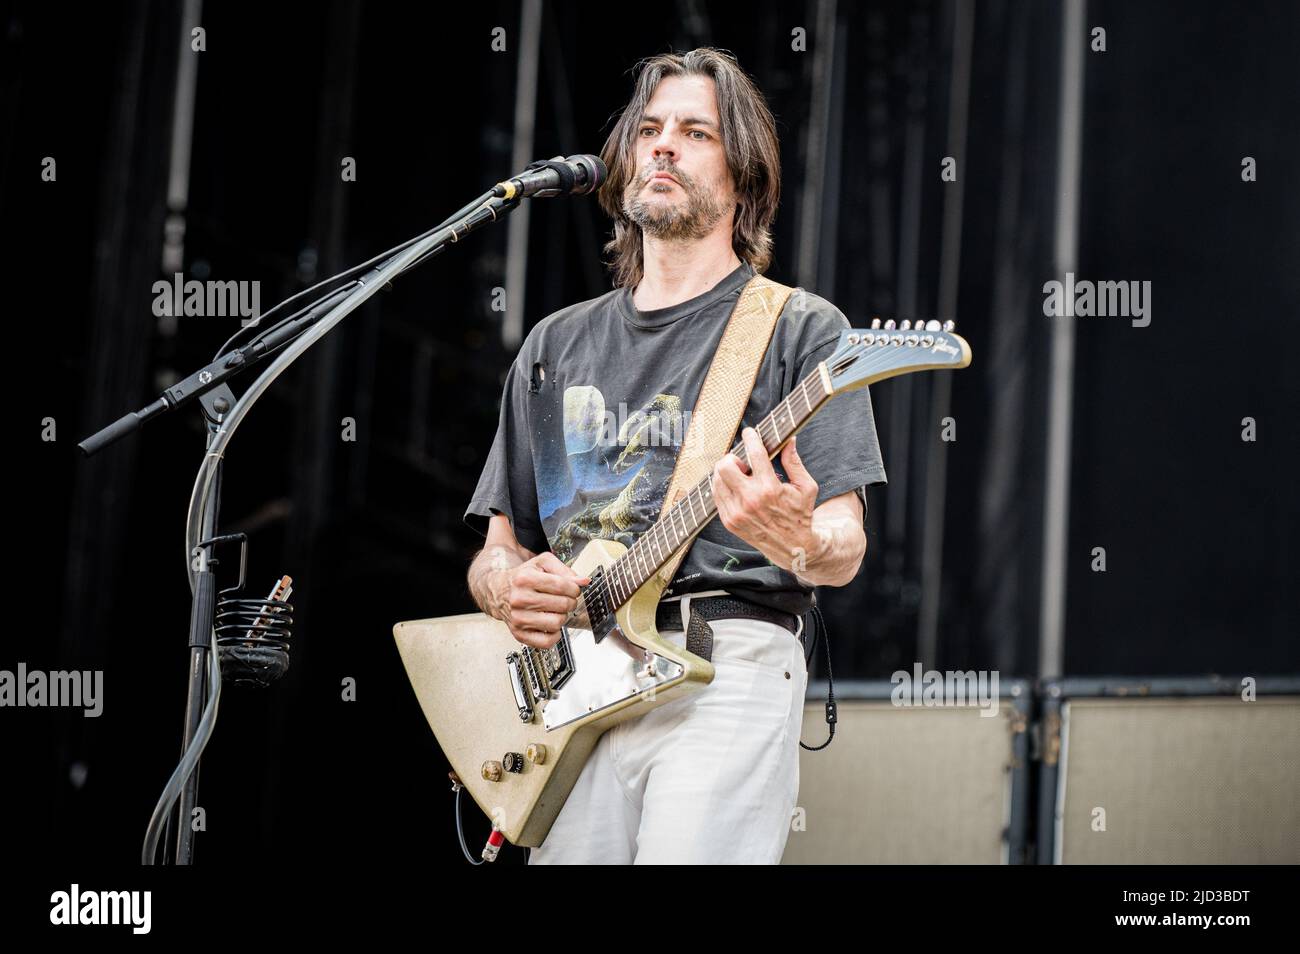 ITALY, MILAN, JUNE 15TH 2022: Brian Bell, guitarist of the American alternative rock band WEEZER preforms live on stage at Ippodromo SNAI La Maura during the 'I-Days Festival 2022' Stock Photo